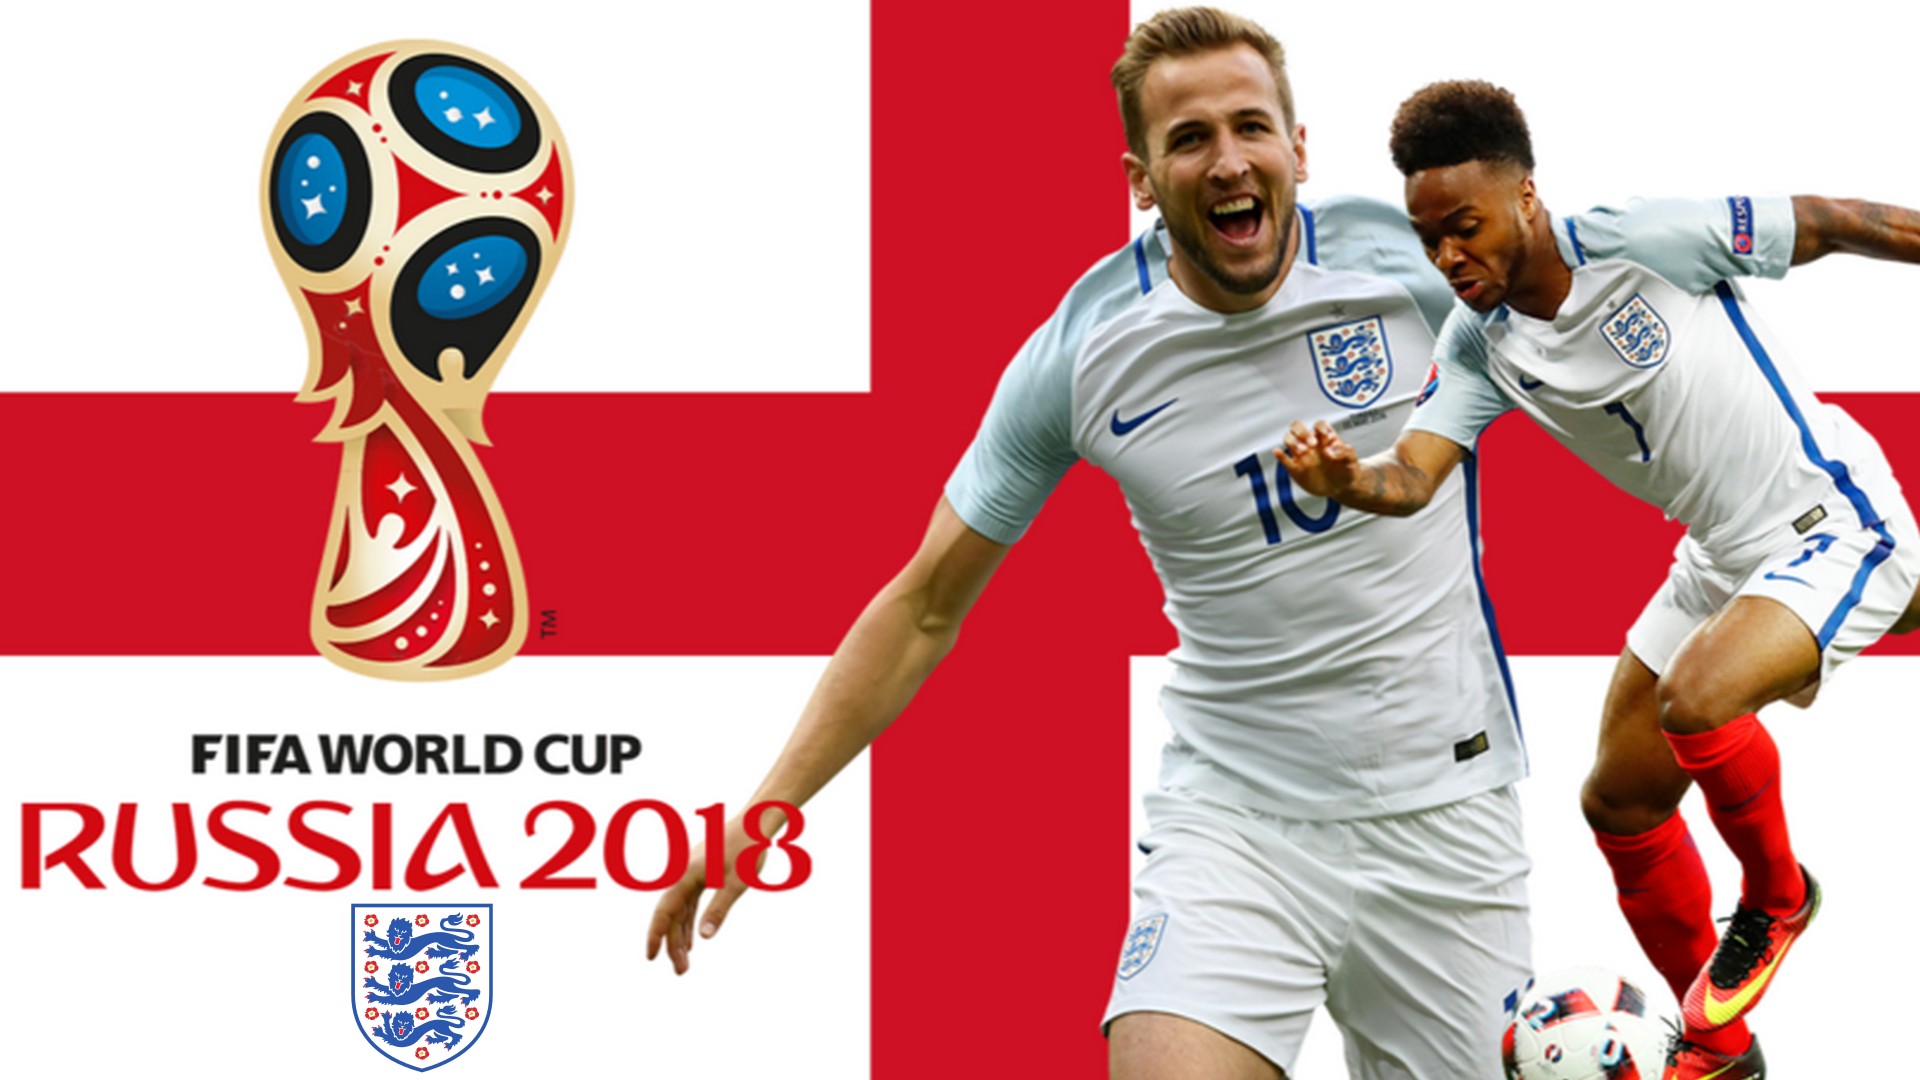 2018 England World Cup Wallpaper HD With Resolution 1920X1080 pixel. You can make this wallpaper for your Mac or Windows Desktop Background, iPhone, Android or Tablet and another Smartphone device for free